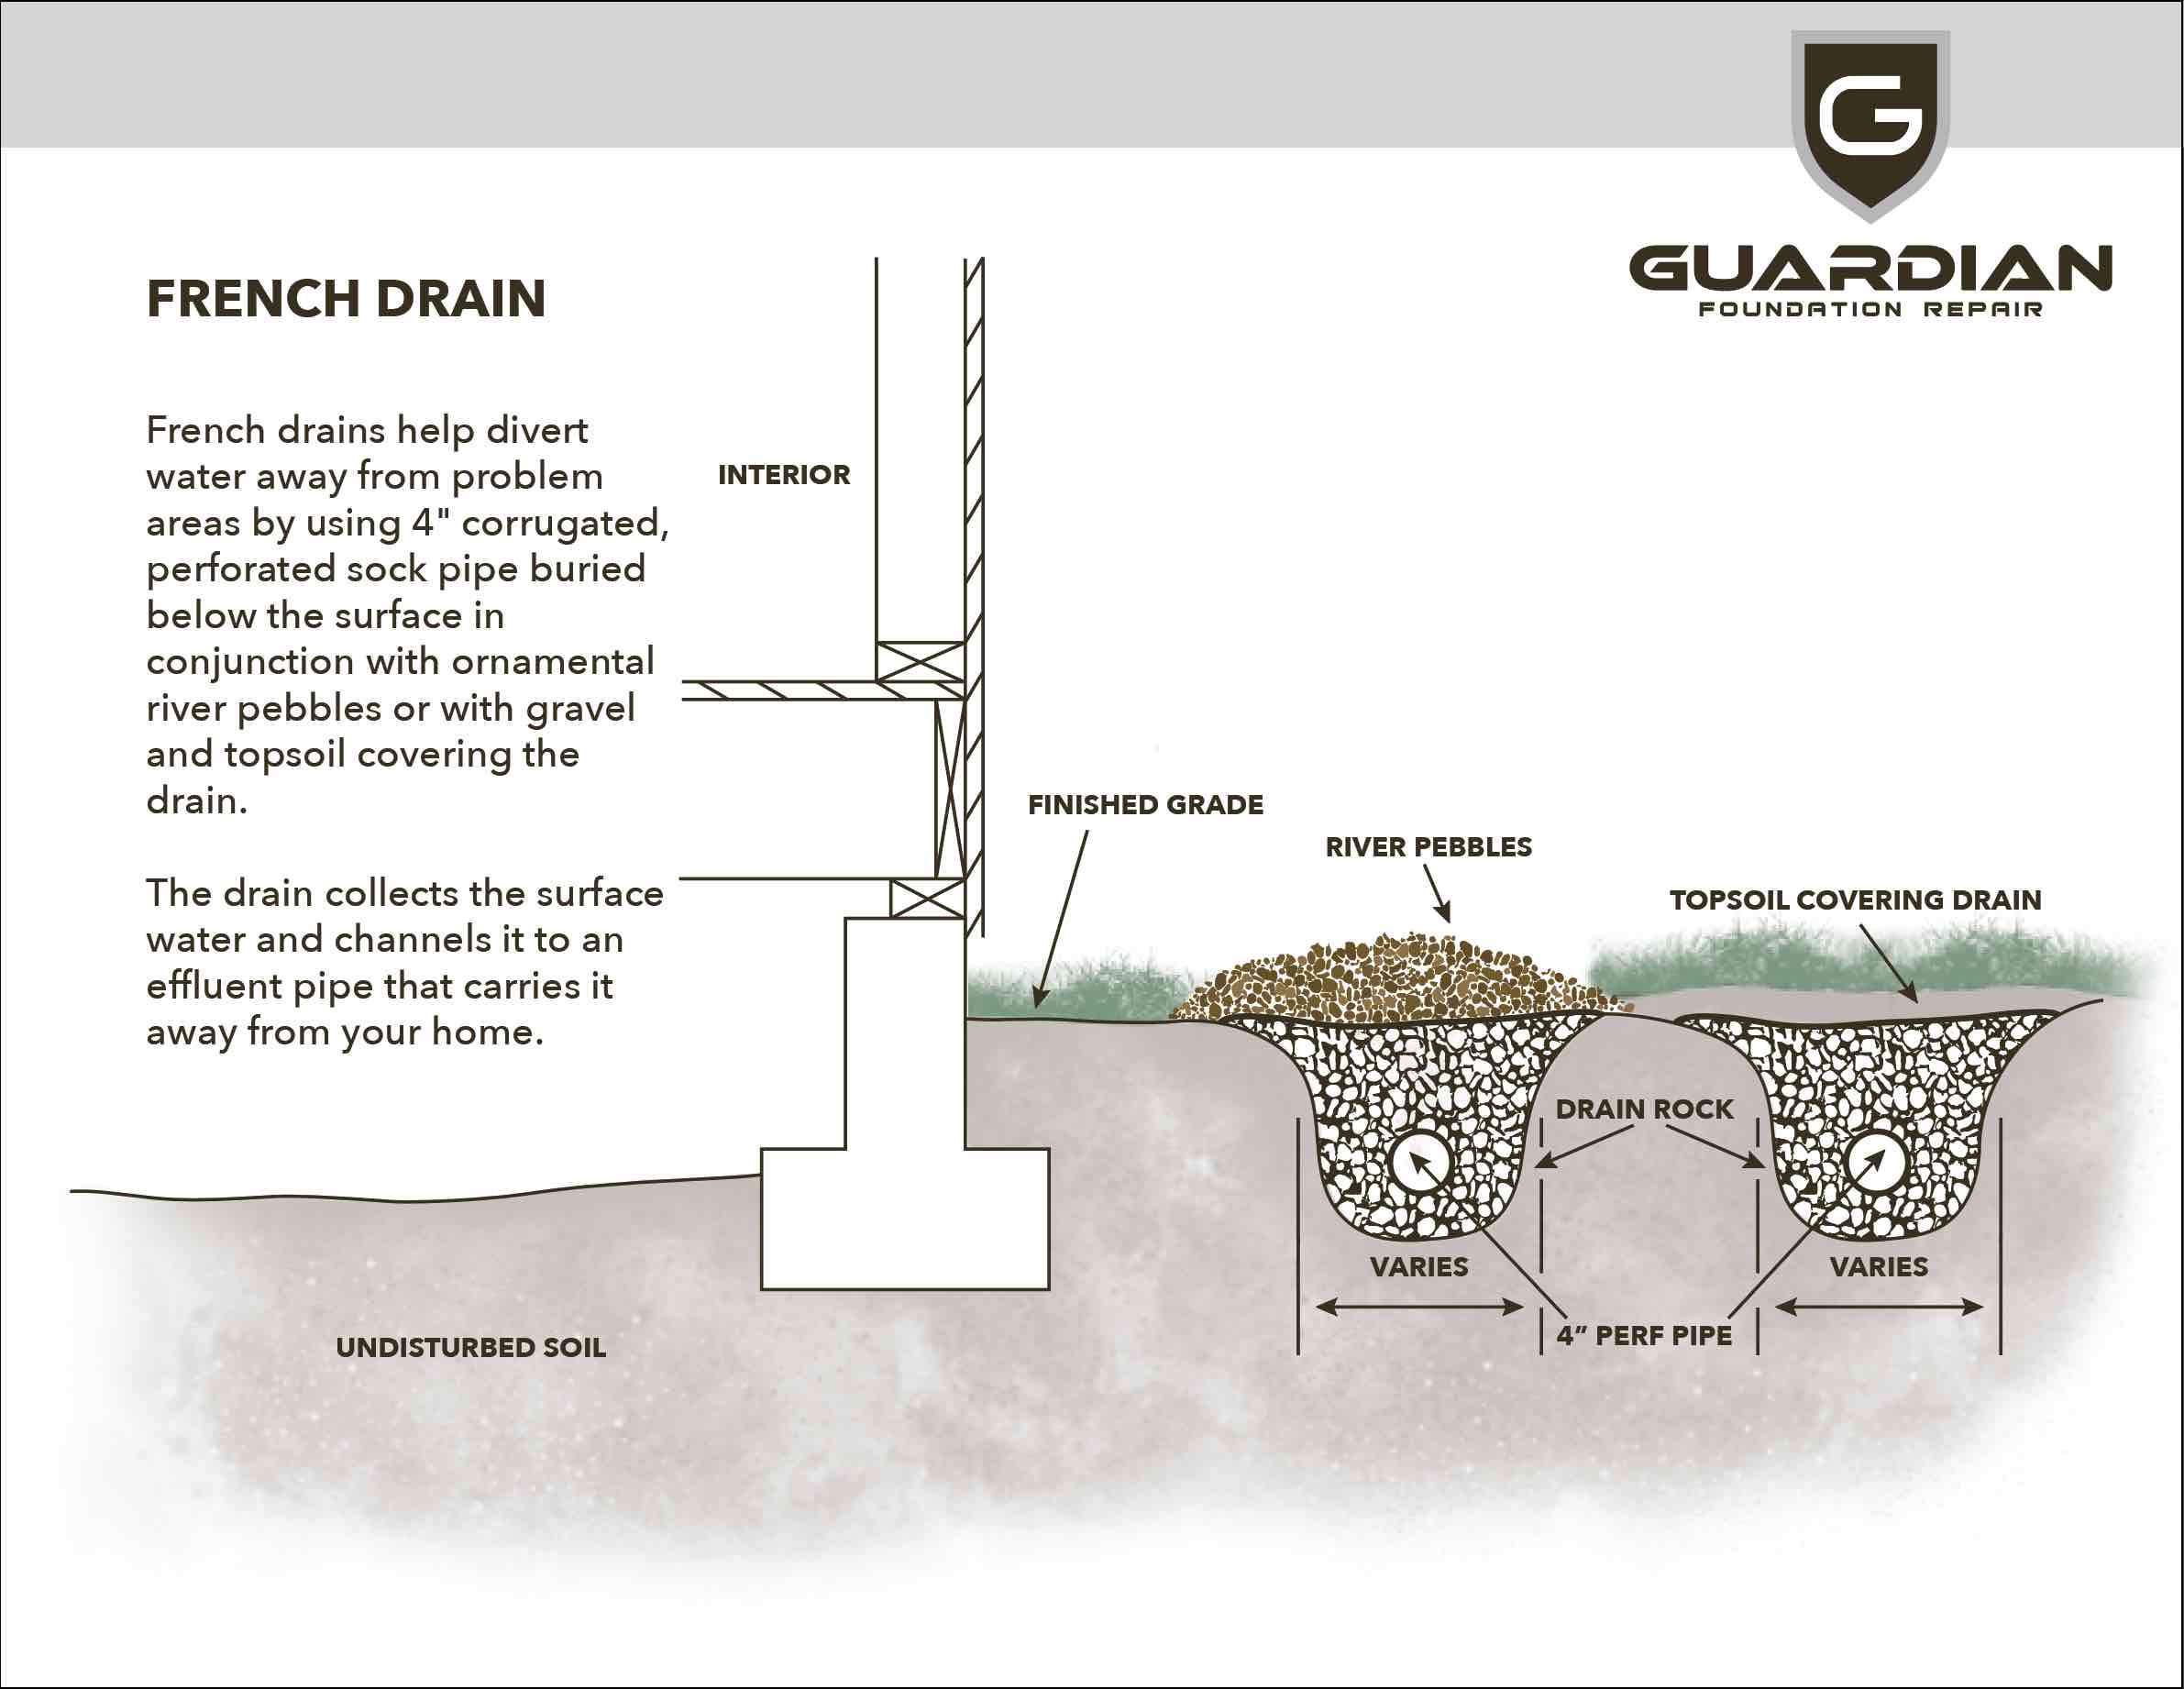 French Drain Service Guardian Foundation Repair (2)